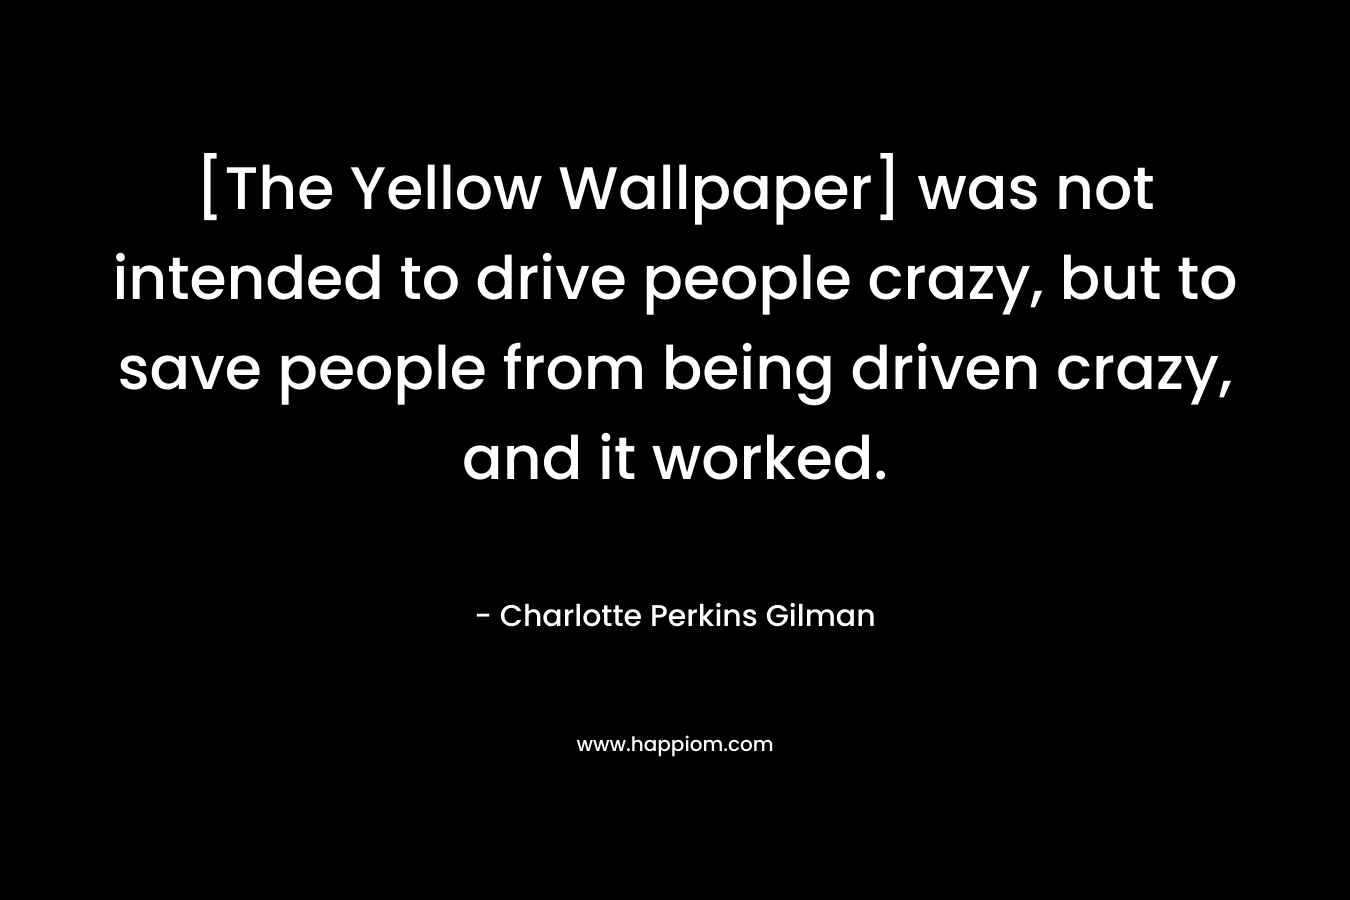 [The Yellow Wallpaper] was not intended to drive people crazy, but to save people from being driven crazy, and it worked.